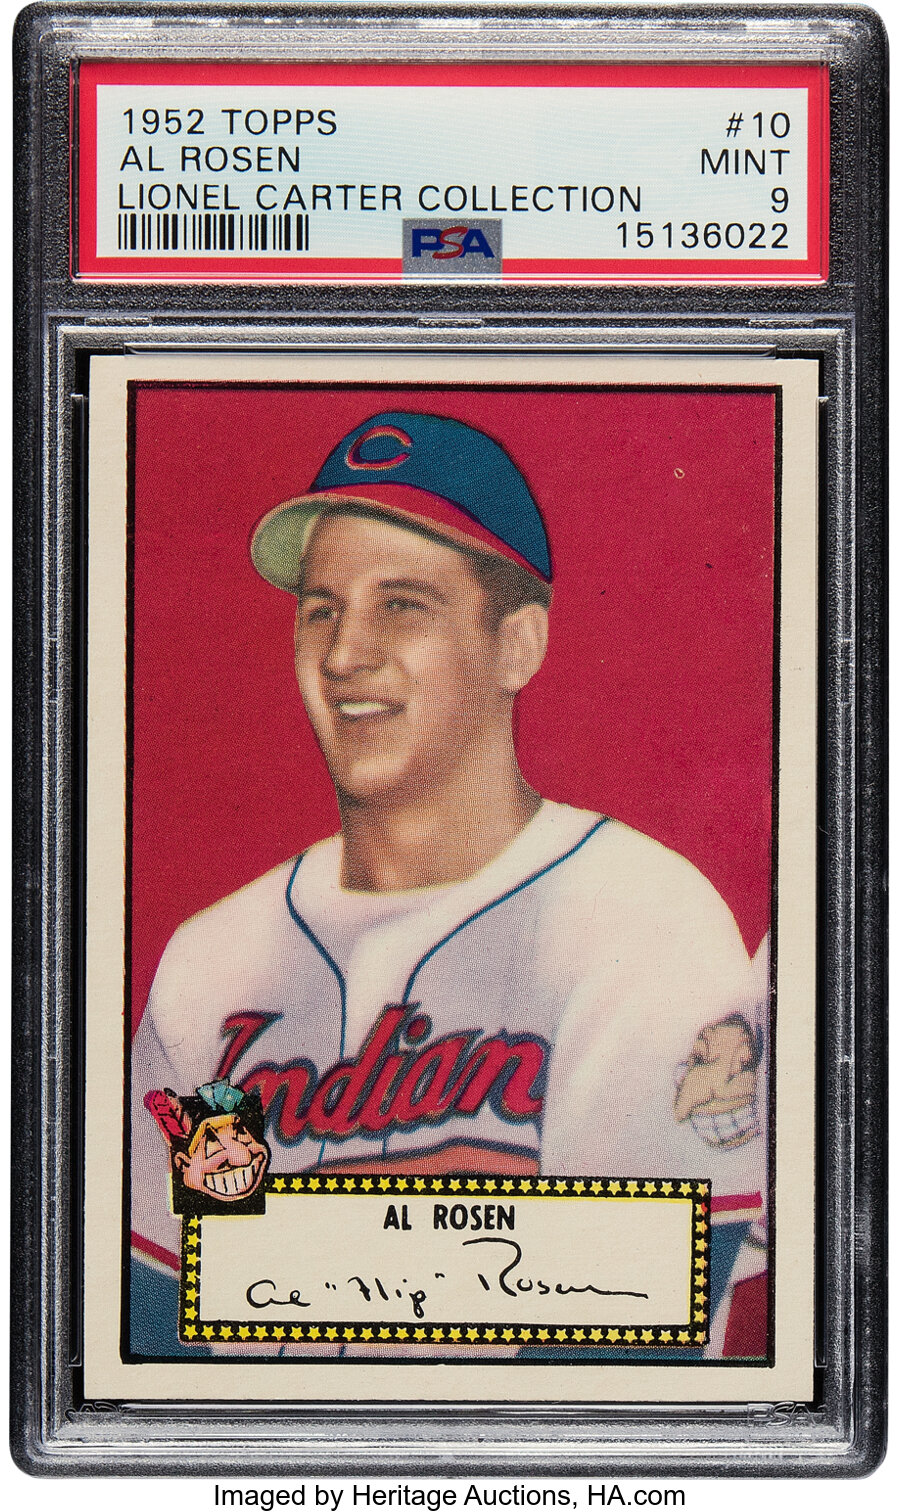 1952 Topps Al Rosen (Black Back) #10 PSA Mint 9 - Pop Two, None Superior! From the Lionel Carter Collection